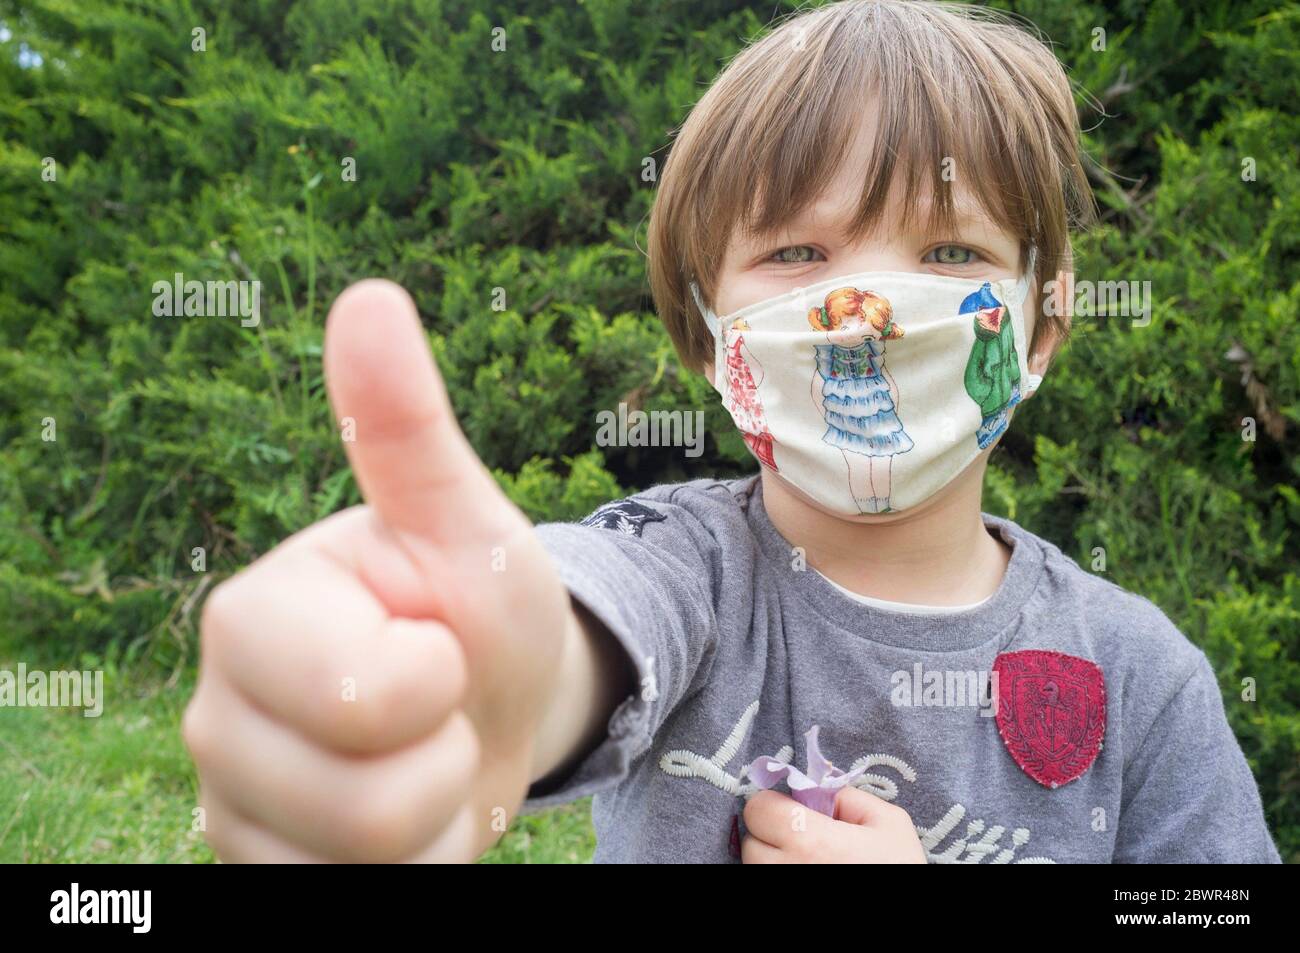 4 years little boy wearing a face mask print with children motifs. He is dooing the thumbs up gesture. Stock Photo